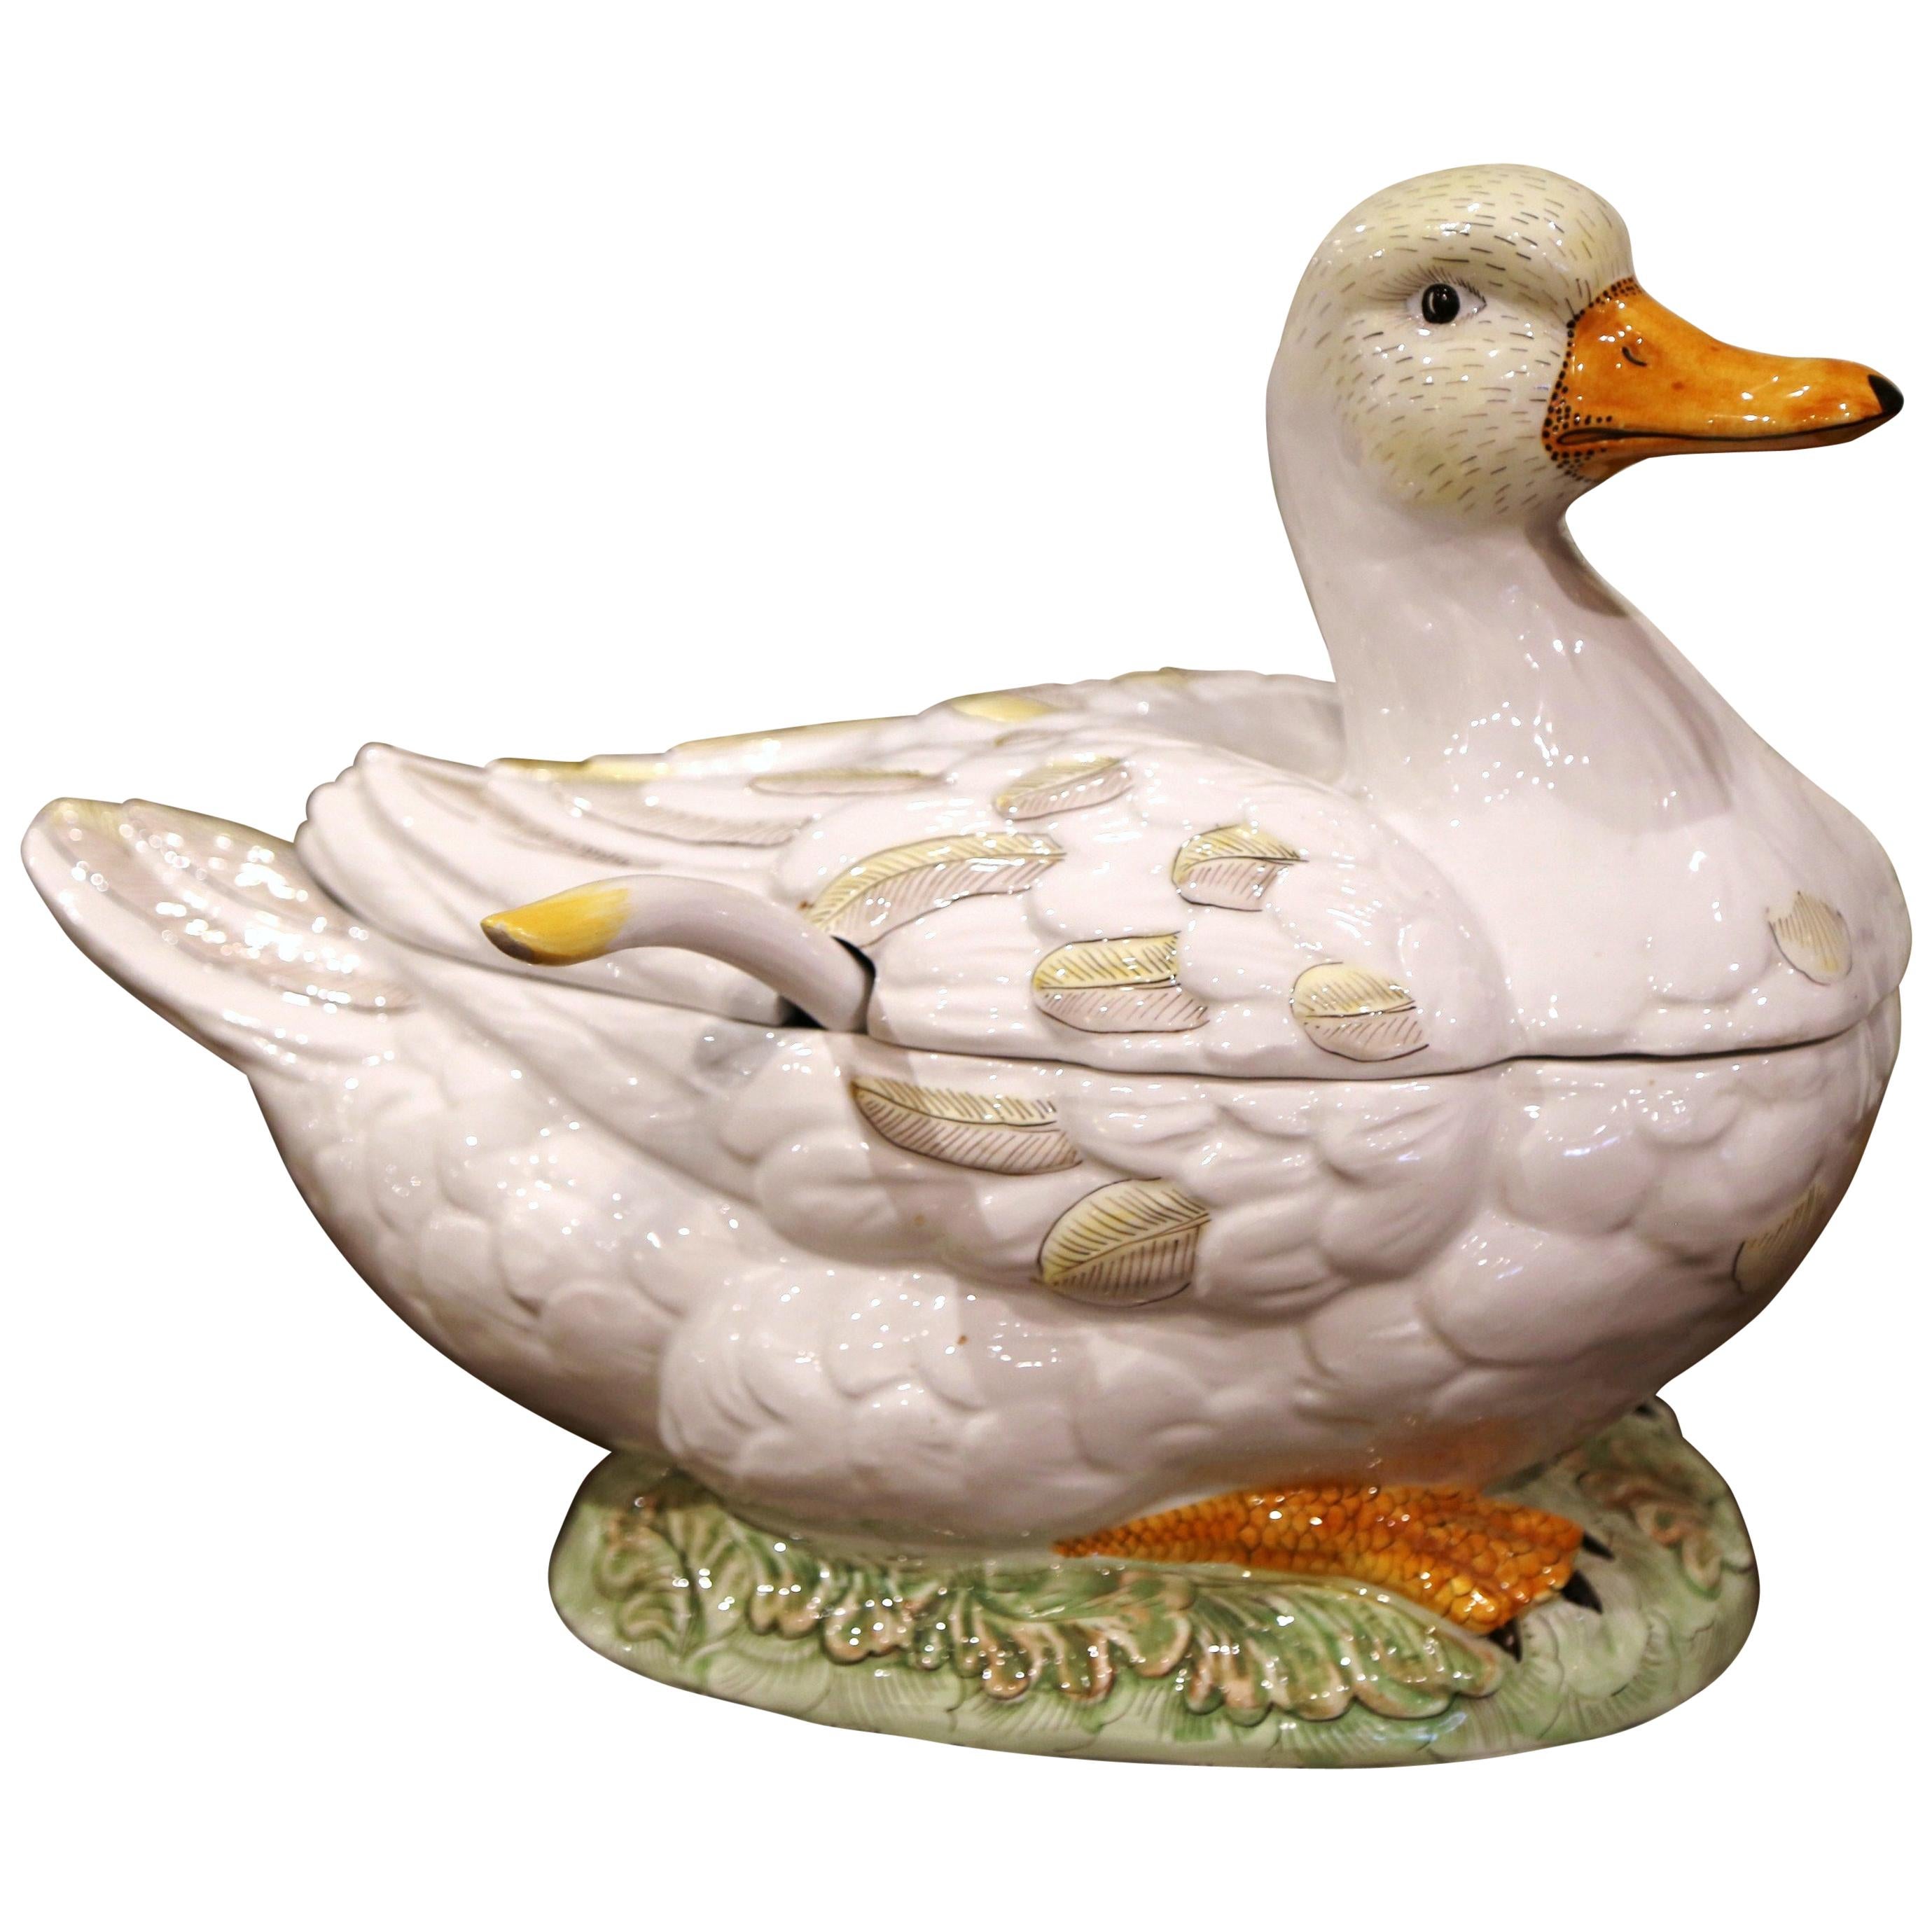 Vintage French Porcelain Duck Center Piece Soup Tureen with Lid and Ladle